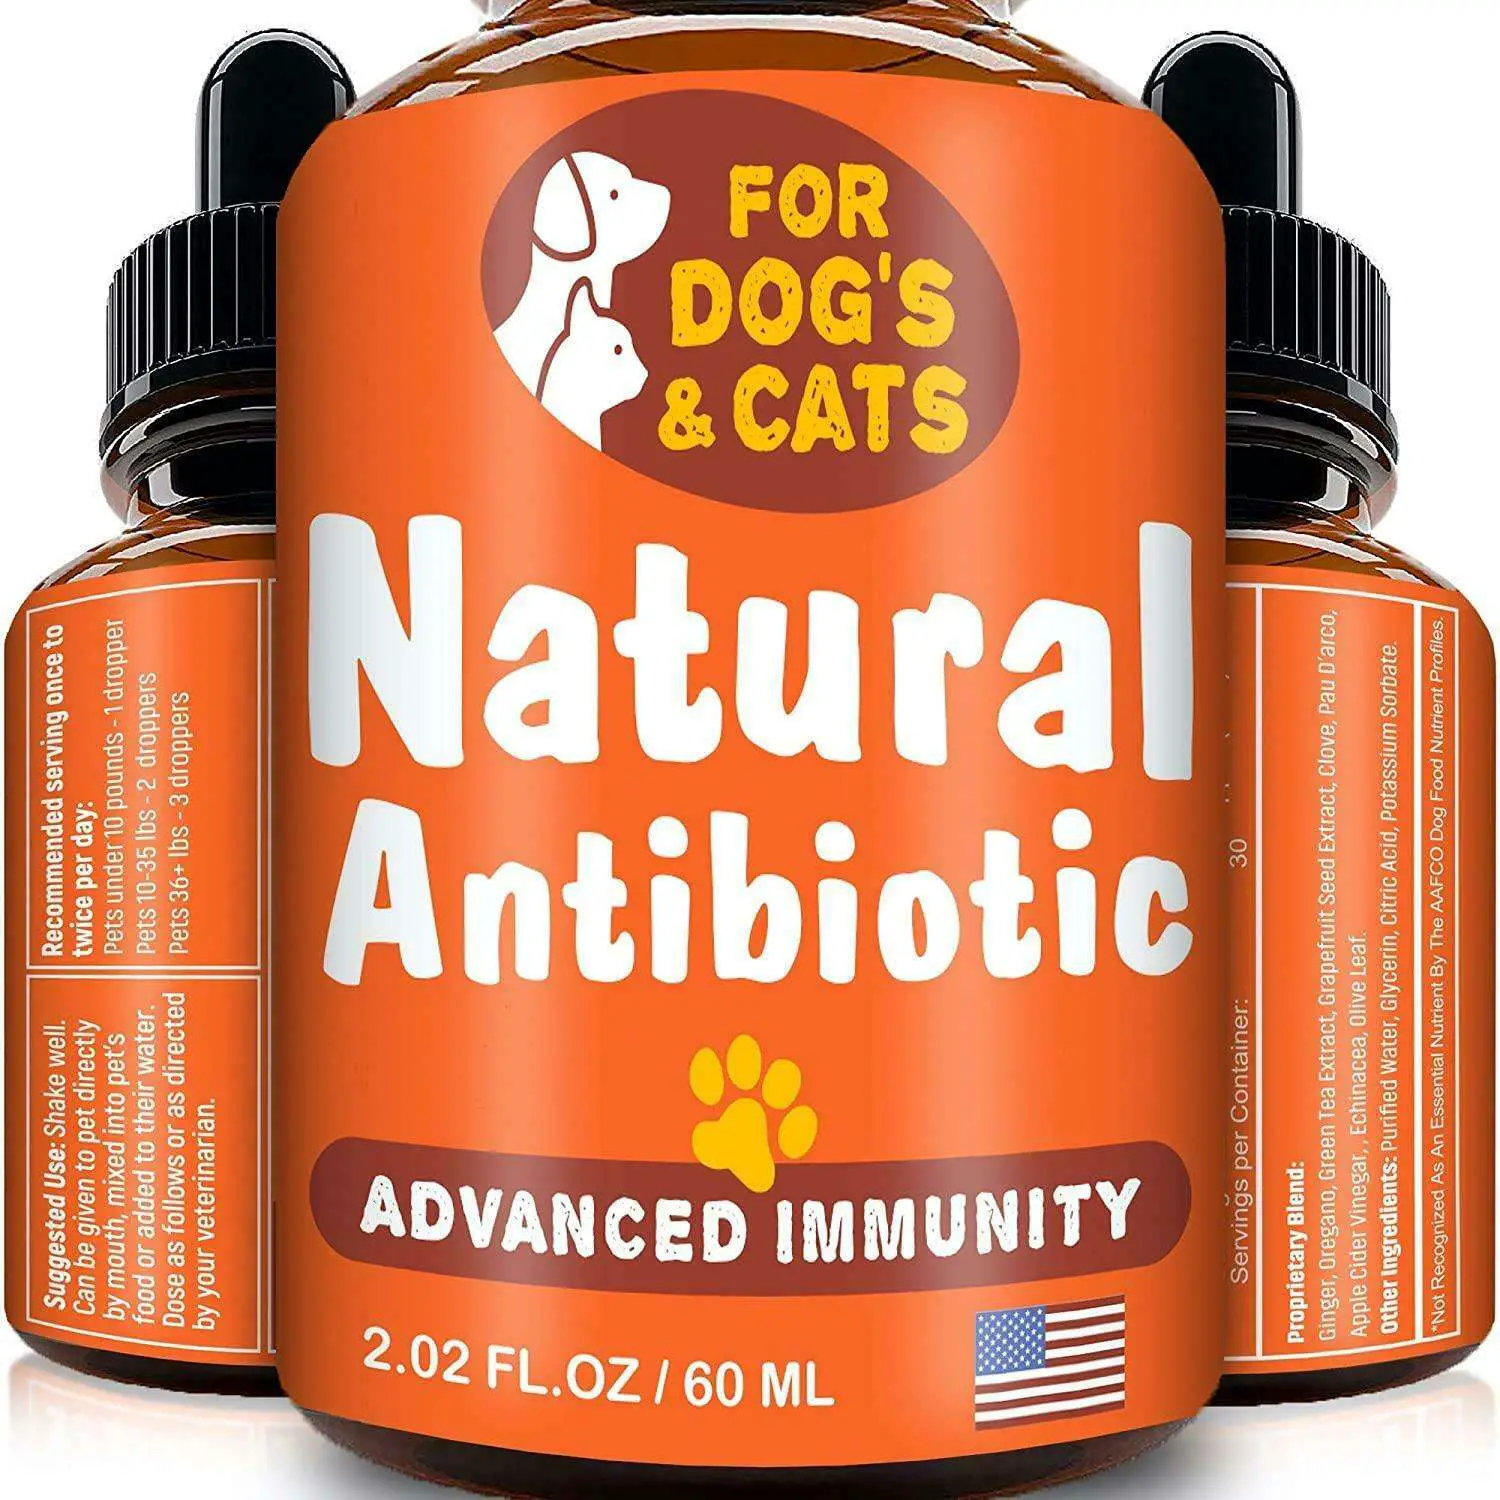 Natural Antibiotic For Dogs And Cats